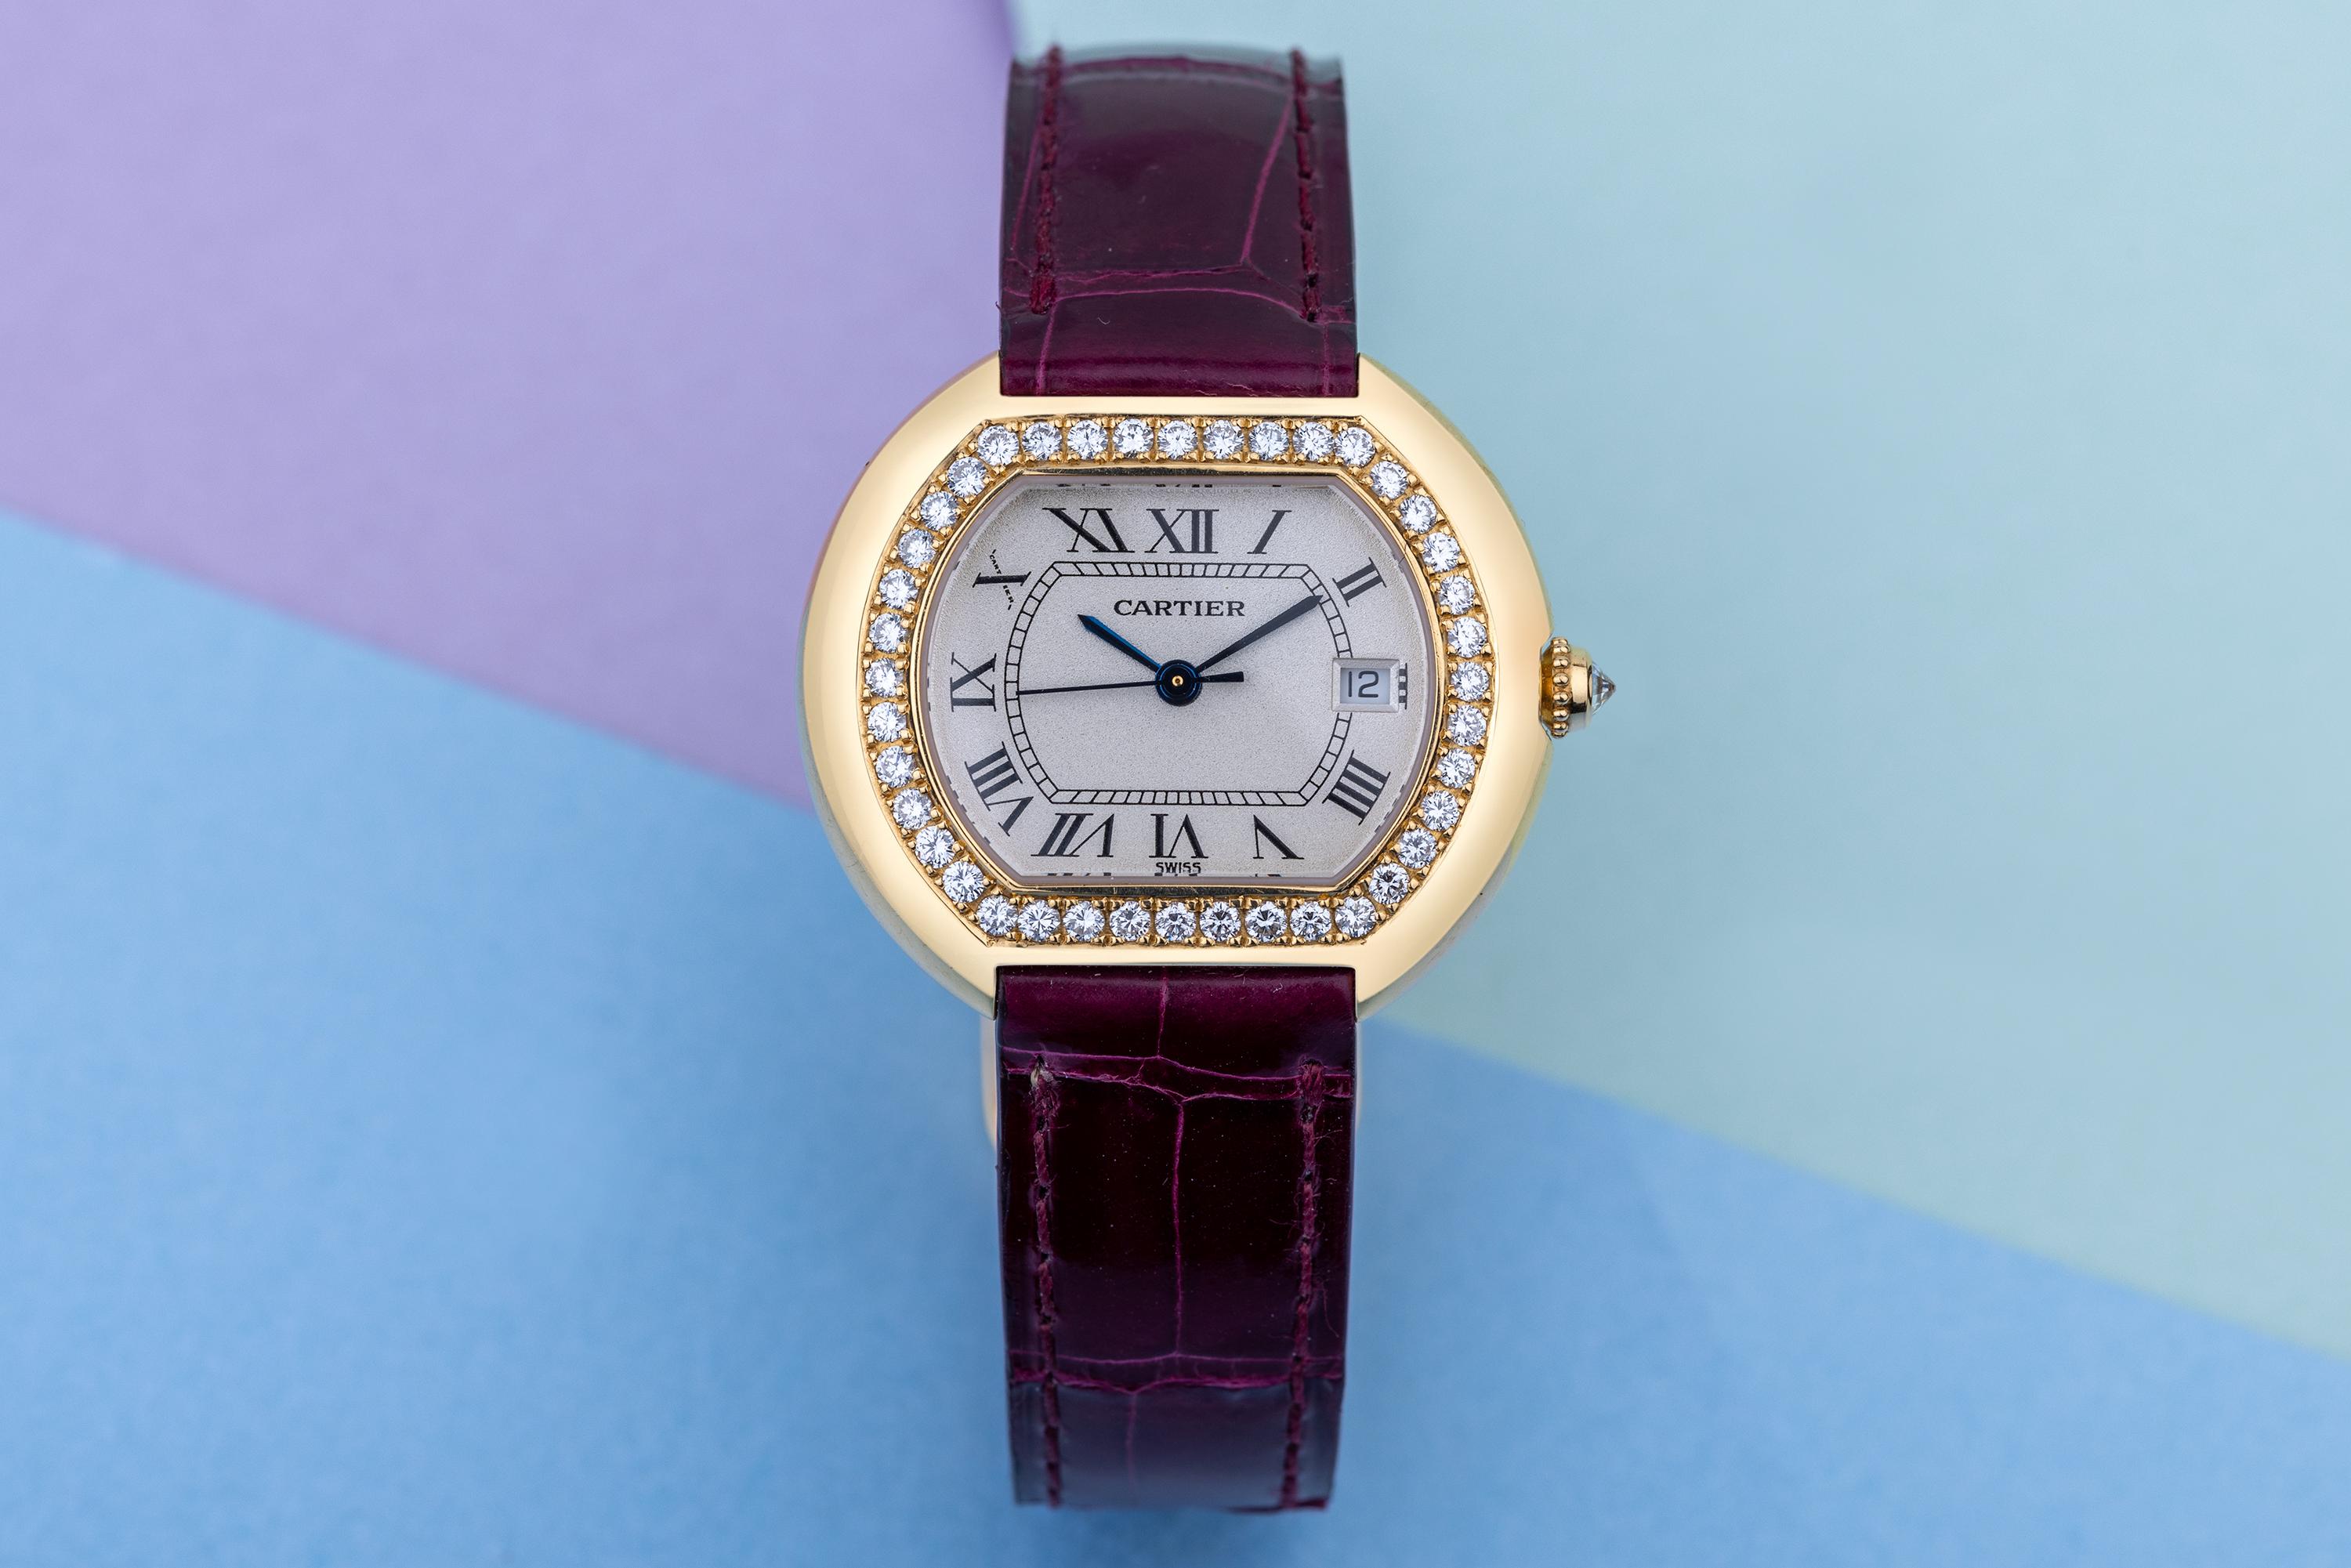 Pre-owned, excellent condition Cartier Ellipse reference 1481 18k Yellow Gold ladies wristwatch. Silver dial, Roman numeral hour markers, date display at 3 o'clock, an 18k Yellow Gold 32mm case, diamond bezel, winder with a diamond and deployant